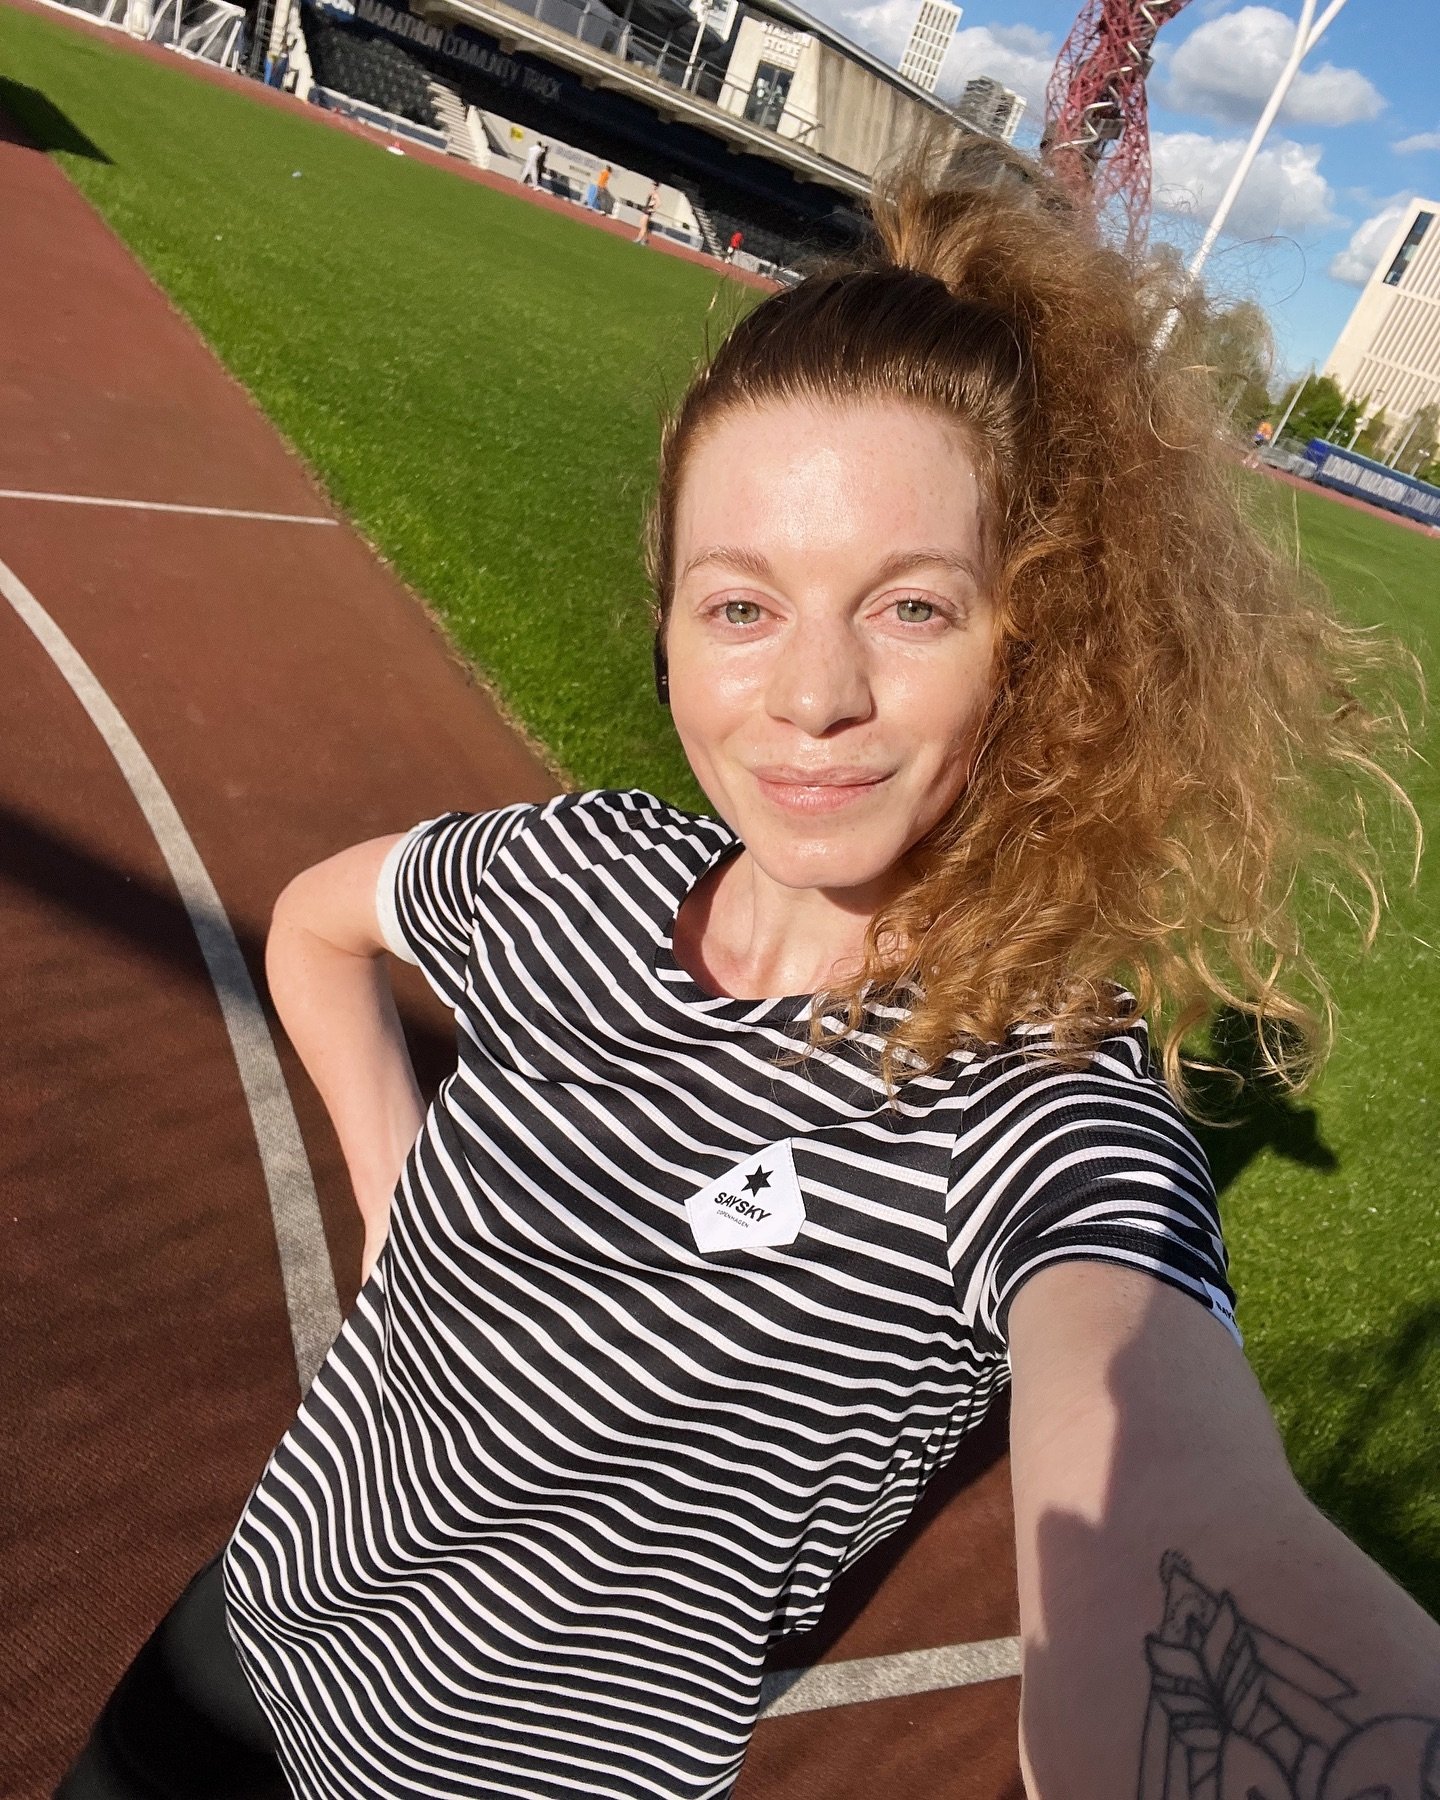 Track Tuesday with the good old 8*1km session. 

I&rsquo;m a morning runner, and I&rsquo;d have had a better workout if I had done it at 7am rather than 5pm. But&hellip; I had the brilliant idea to enter evening races so now I&rsquo;ve got to train m